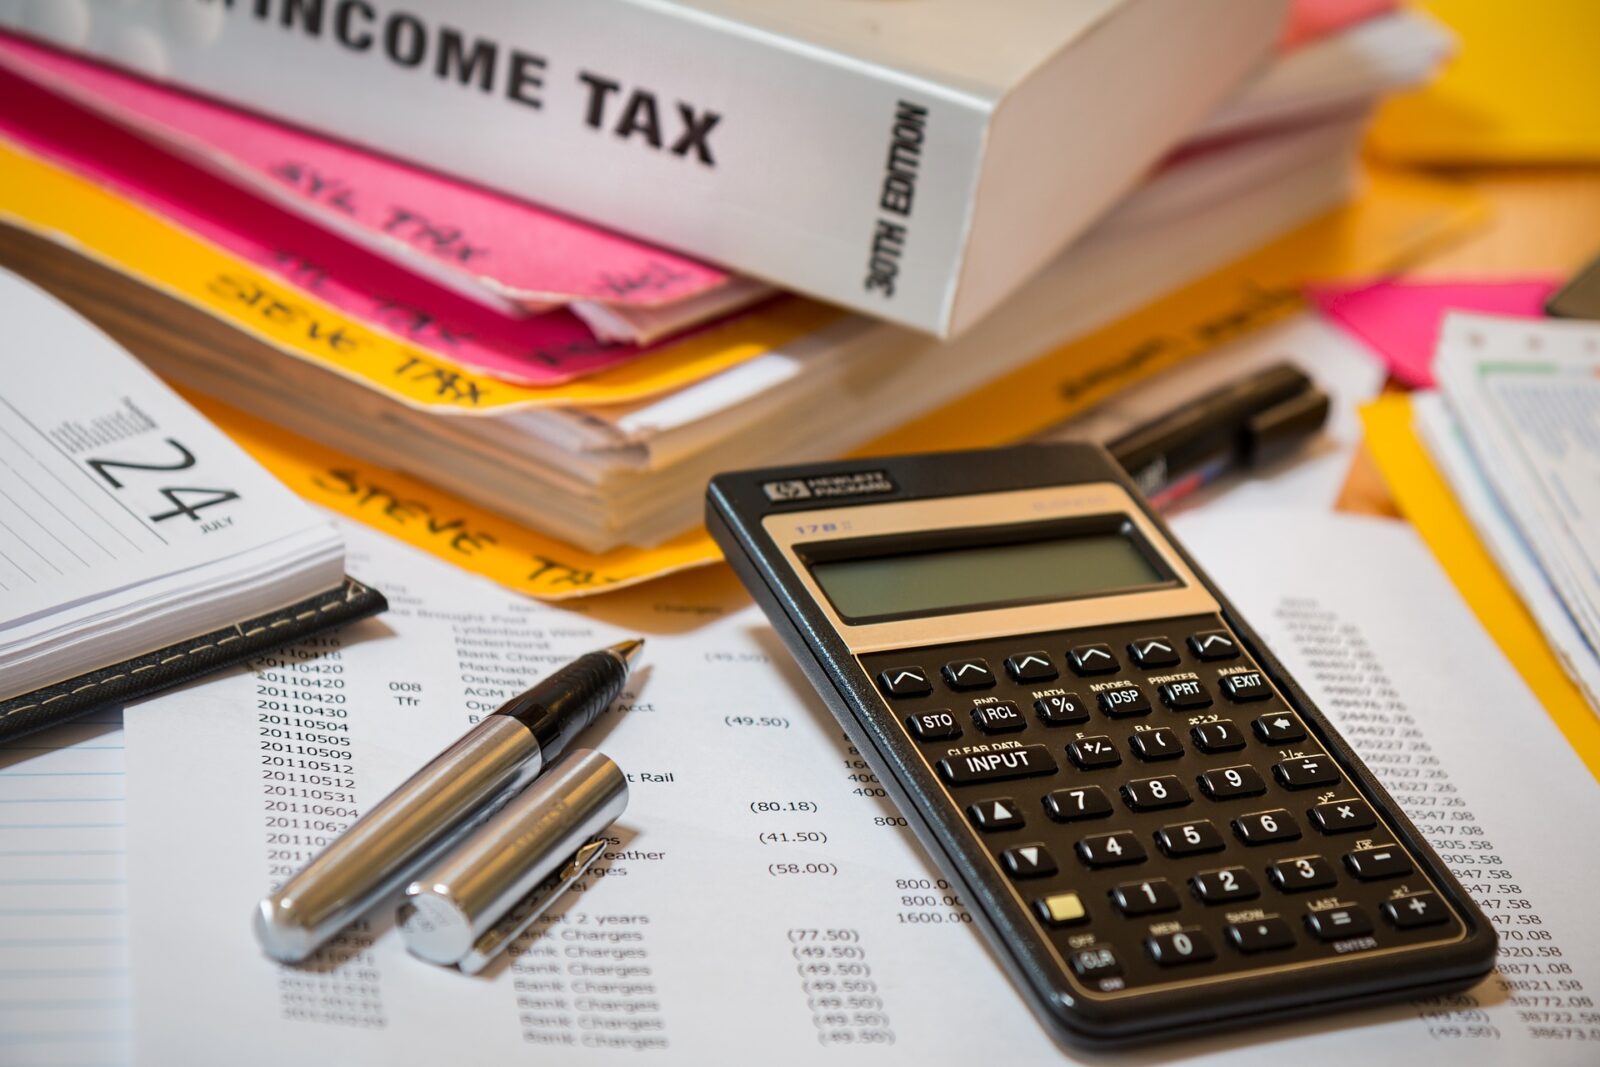 Personal tax book and calculator